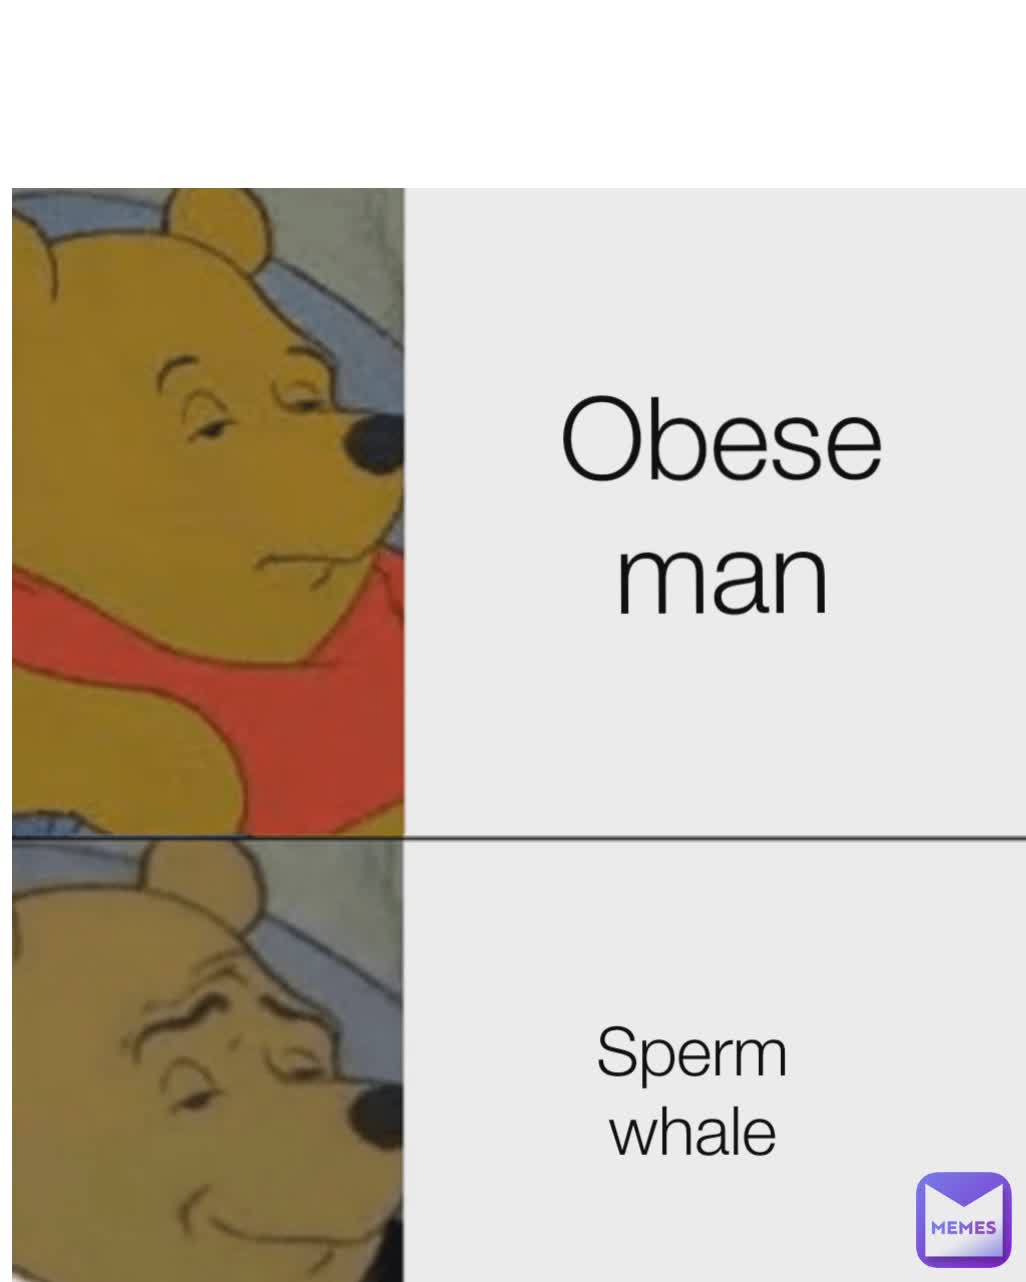 Obese man Sperm whale